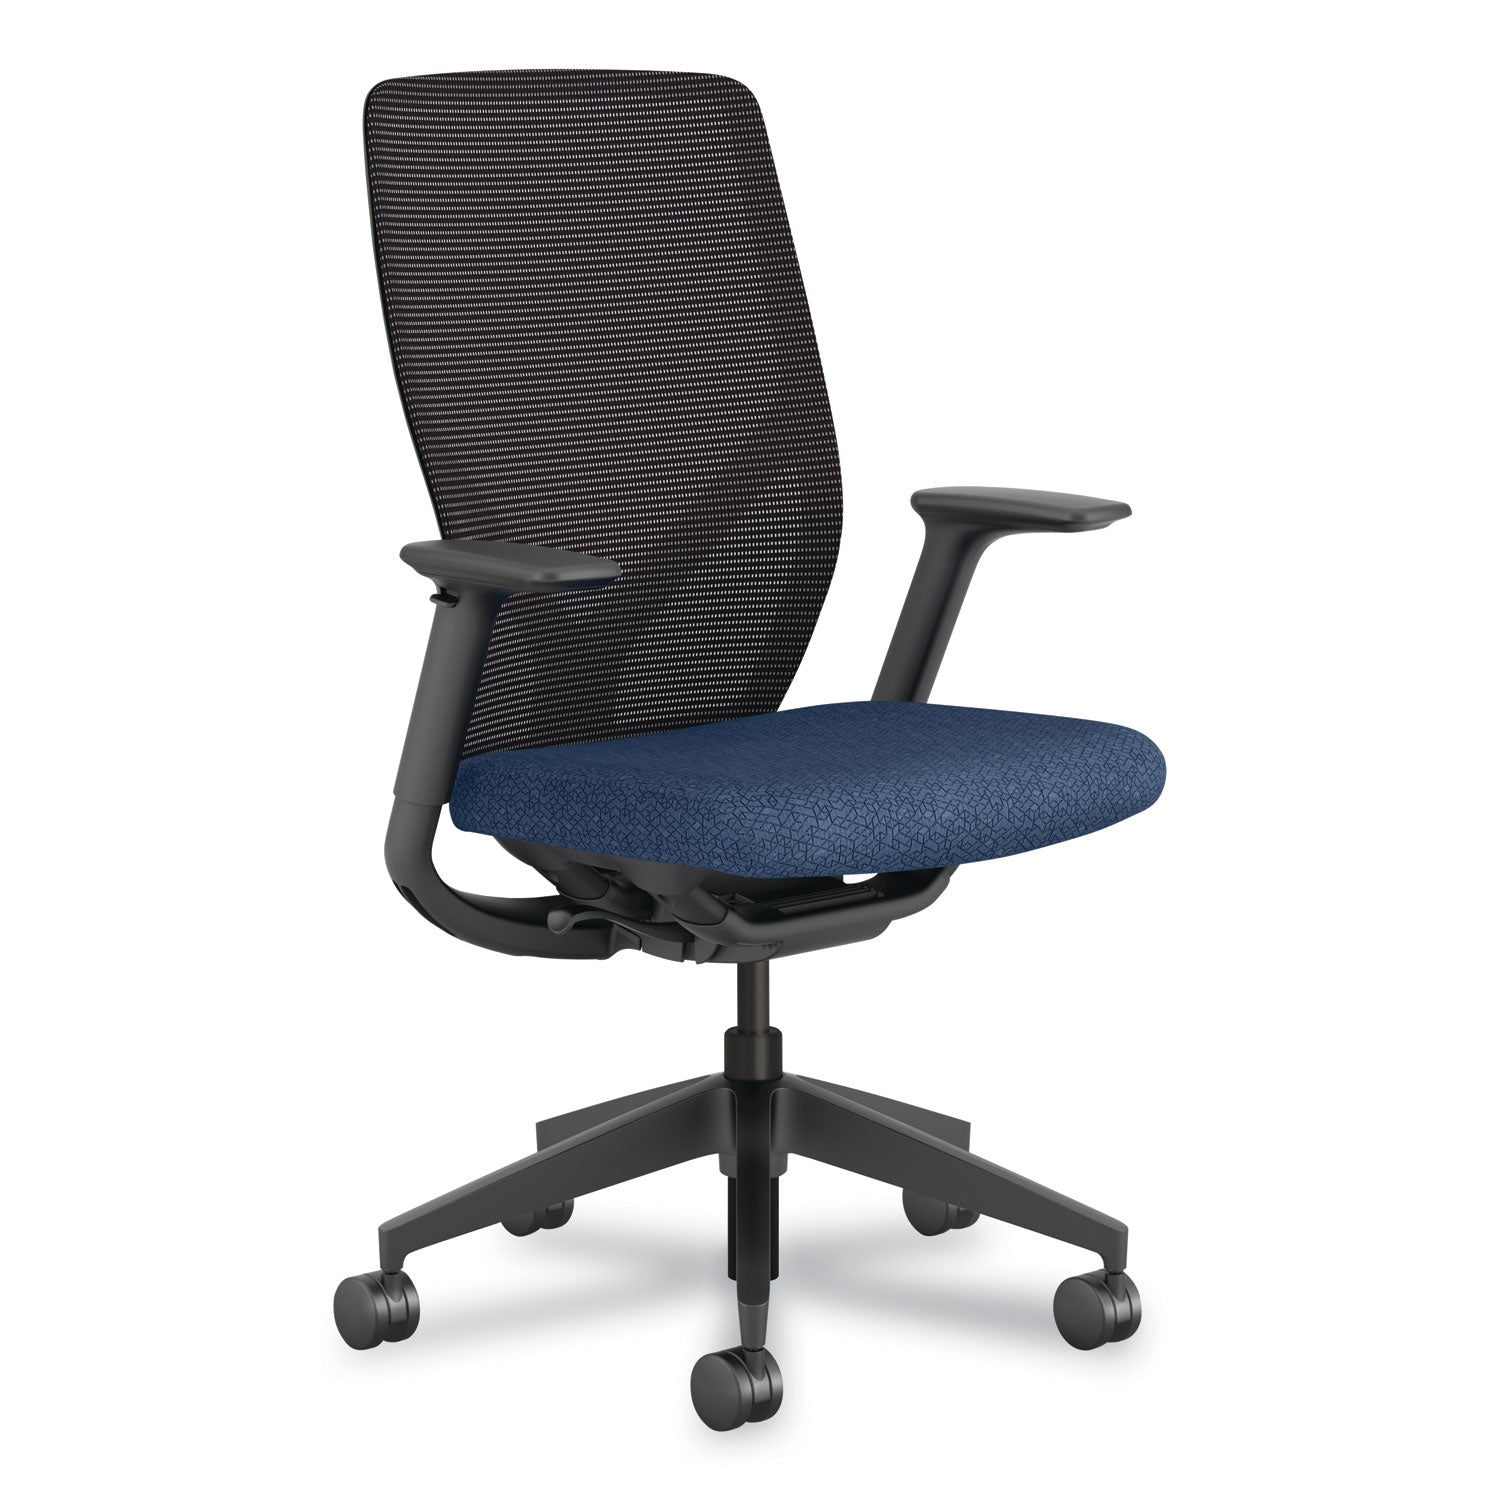 flexion-mesh-back-chair-supports-up-to-300-lb-1481-to-197-seat-ht-navy-seat-black-back-base-ships-in-7-10-bus-days_honfxtsamax13nl - 1